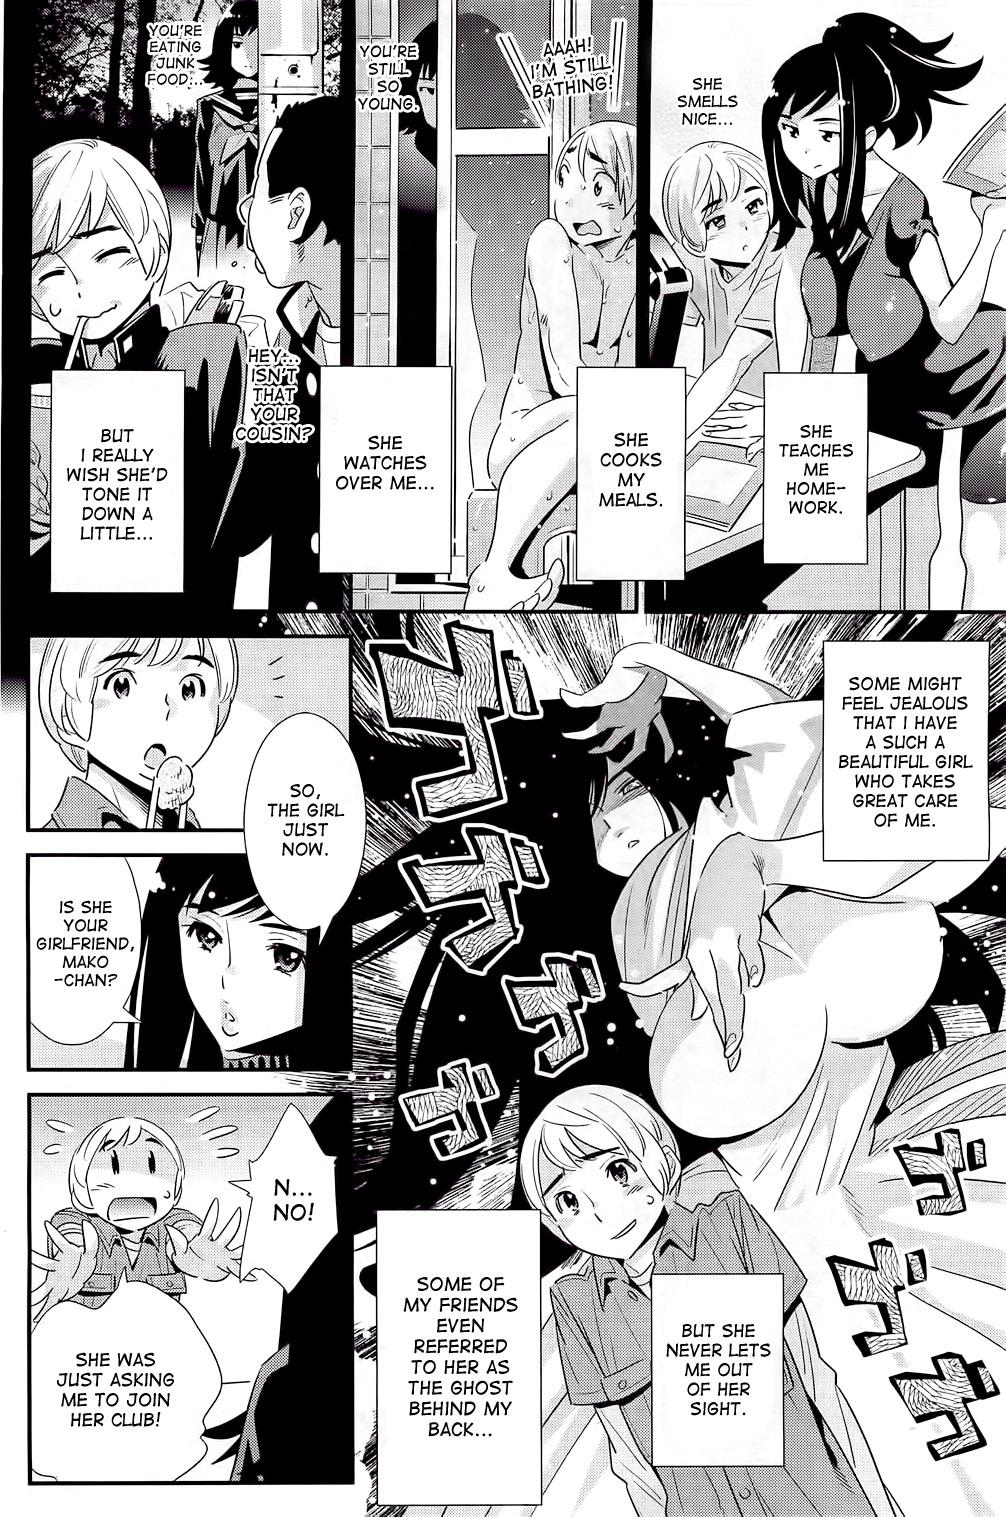 Internal Boku no Haigorei? | The Ghost Behind My Back? Amateur - Page 4